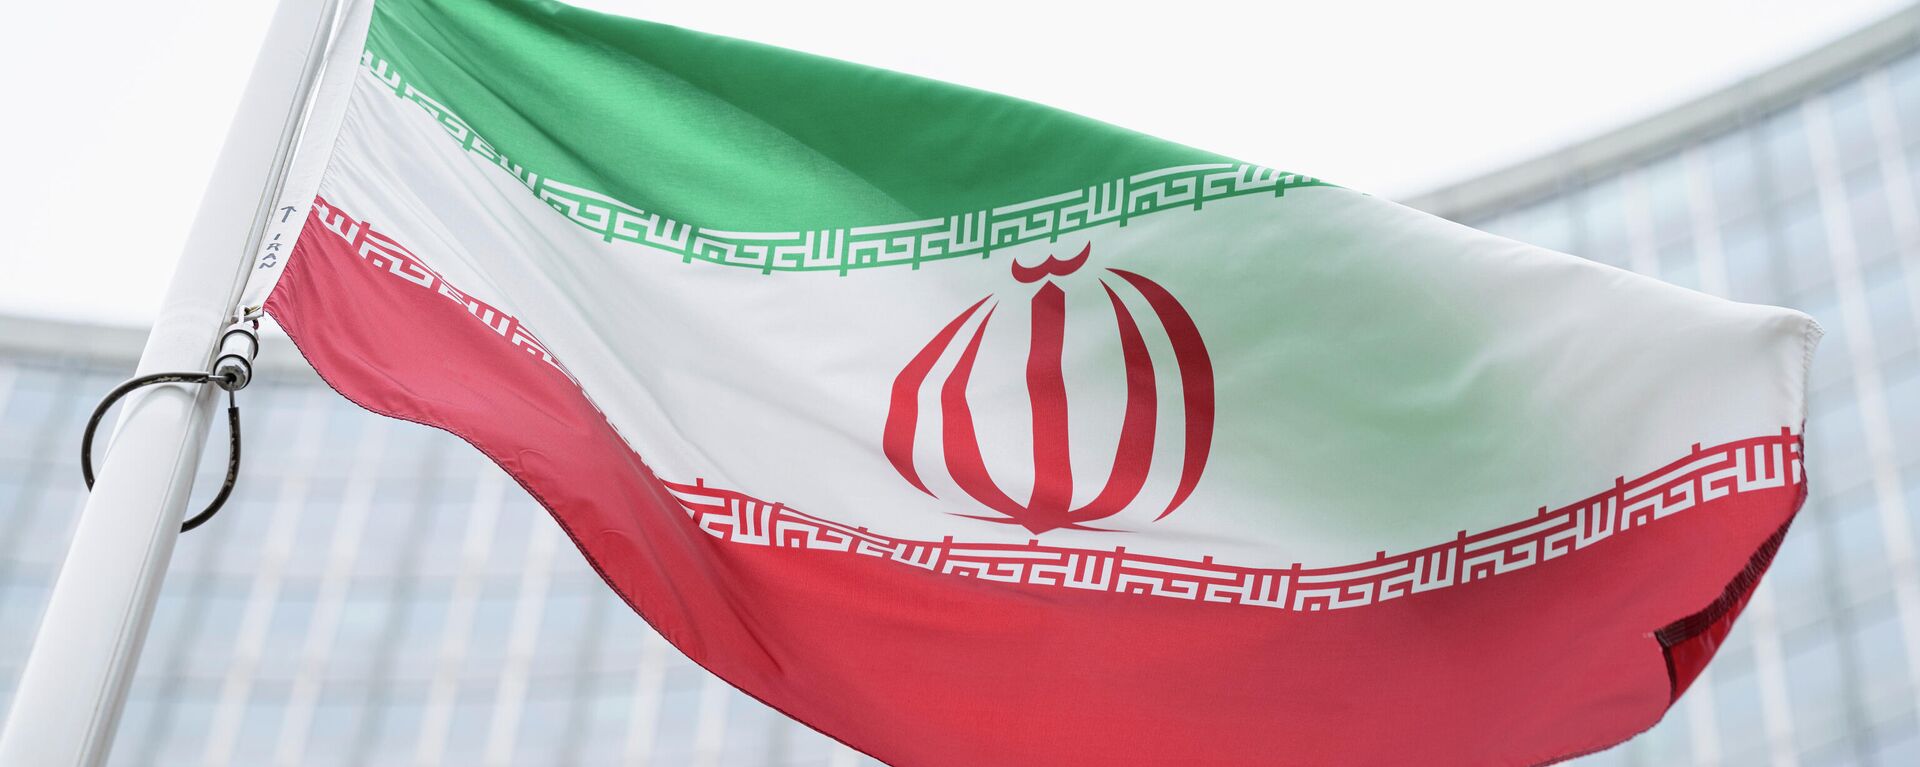 FILE - The flag of Iran waves in front of the the International Center building with the headquarters of the International Atomic Energy Agency, IAEA, in Vienna, AustriaI, May 24, 2021. On Monday, Nov. 29, 2021, negotiators are gathering in Vienna to resume efforts to revive Iran's 2015 nuclear deal with world powers, with hopes of quick progress muted after the arrival of a hard-line new government in Tehran led to a more than five-month hiatus. (AP Photo/Florian Schroetter, FILE) - Sputnik International, 1920, 20.10.2022